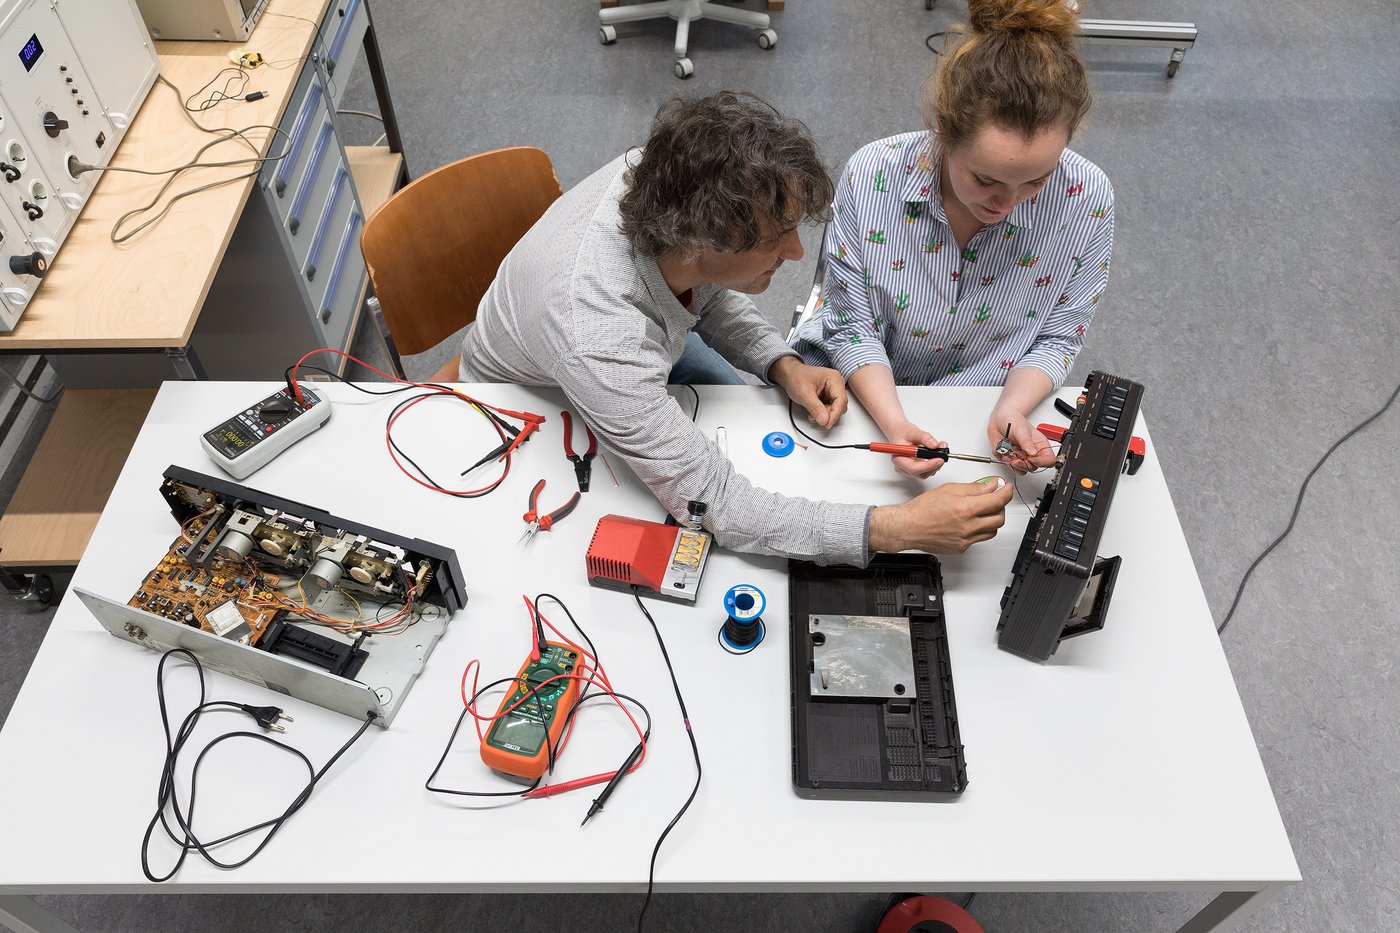 In the foreground of the image, a bird's eye view shows a bright work table on which a disassembled audio player and measuring devices are lying. A lecturer and a student sit side by side at this table and work together on the device.